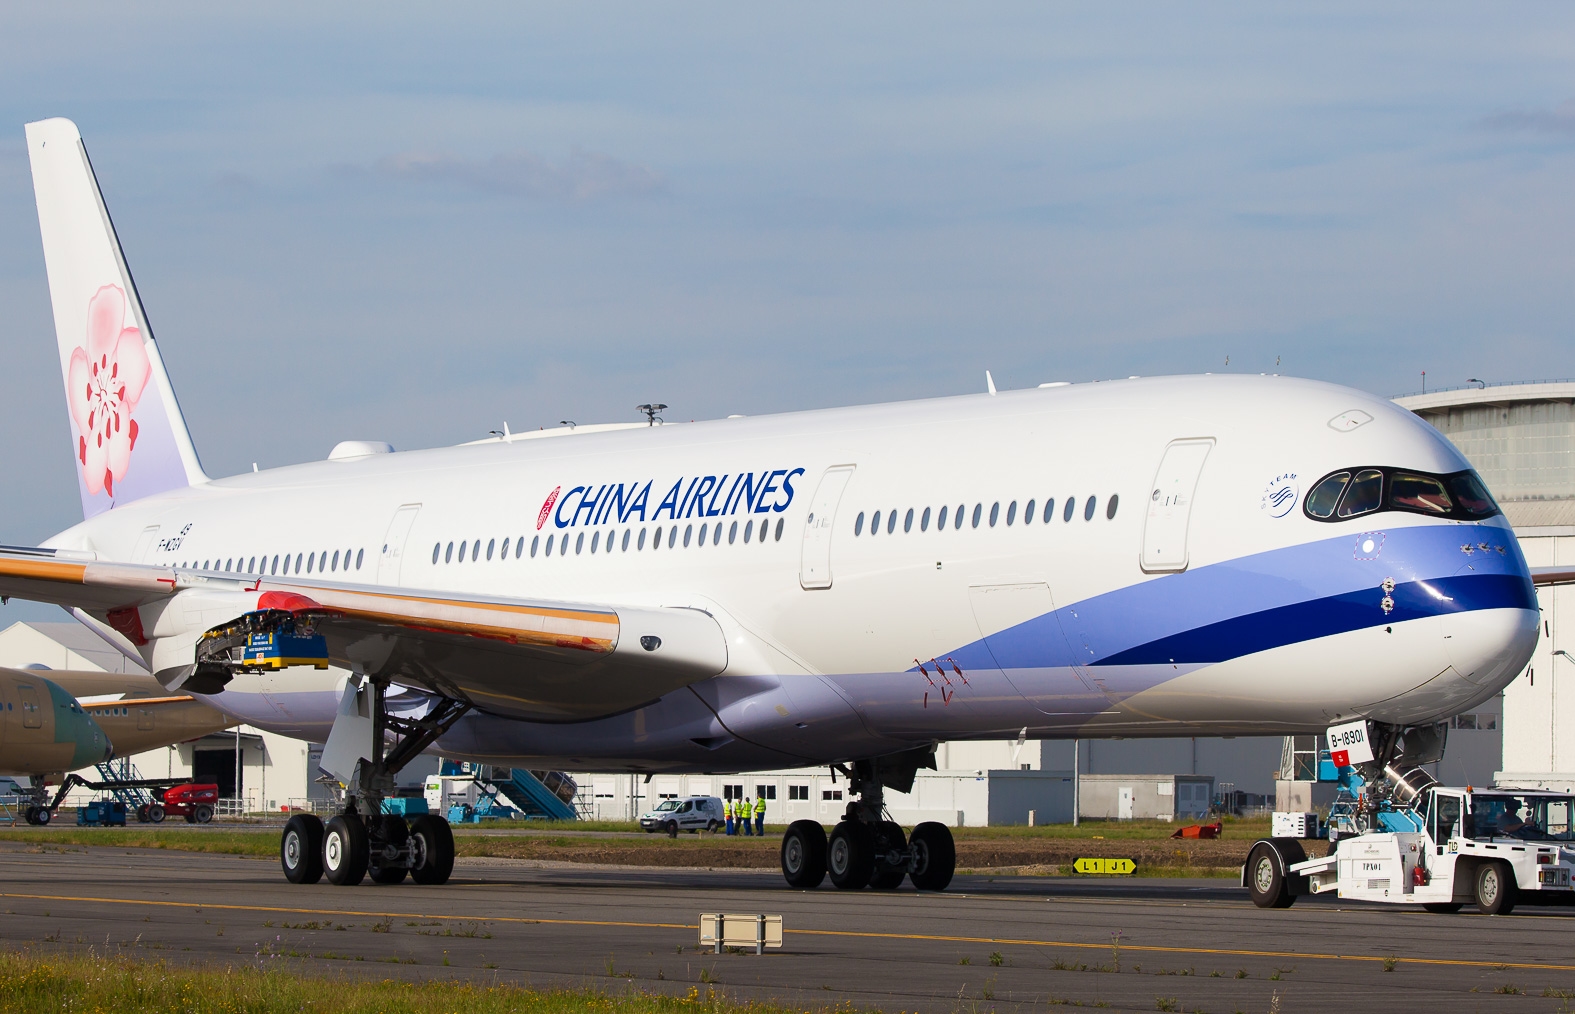 A350-900 The China Airlines Toulouse Blagnac - Airbus A320 Family , HD Wallpaper & Backgrounds